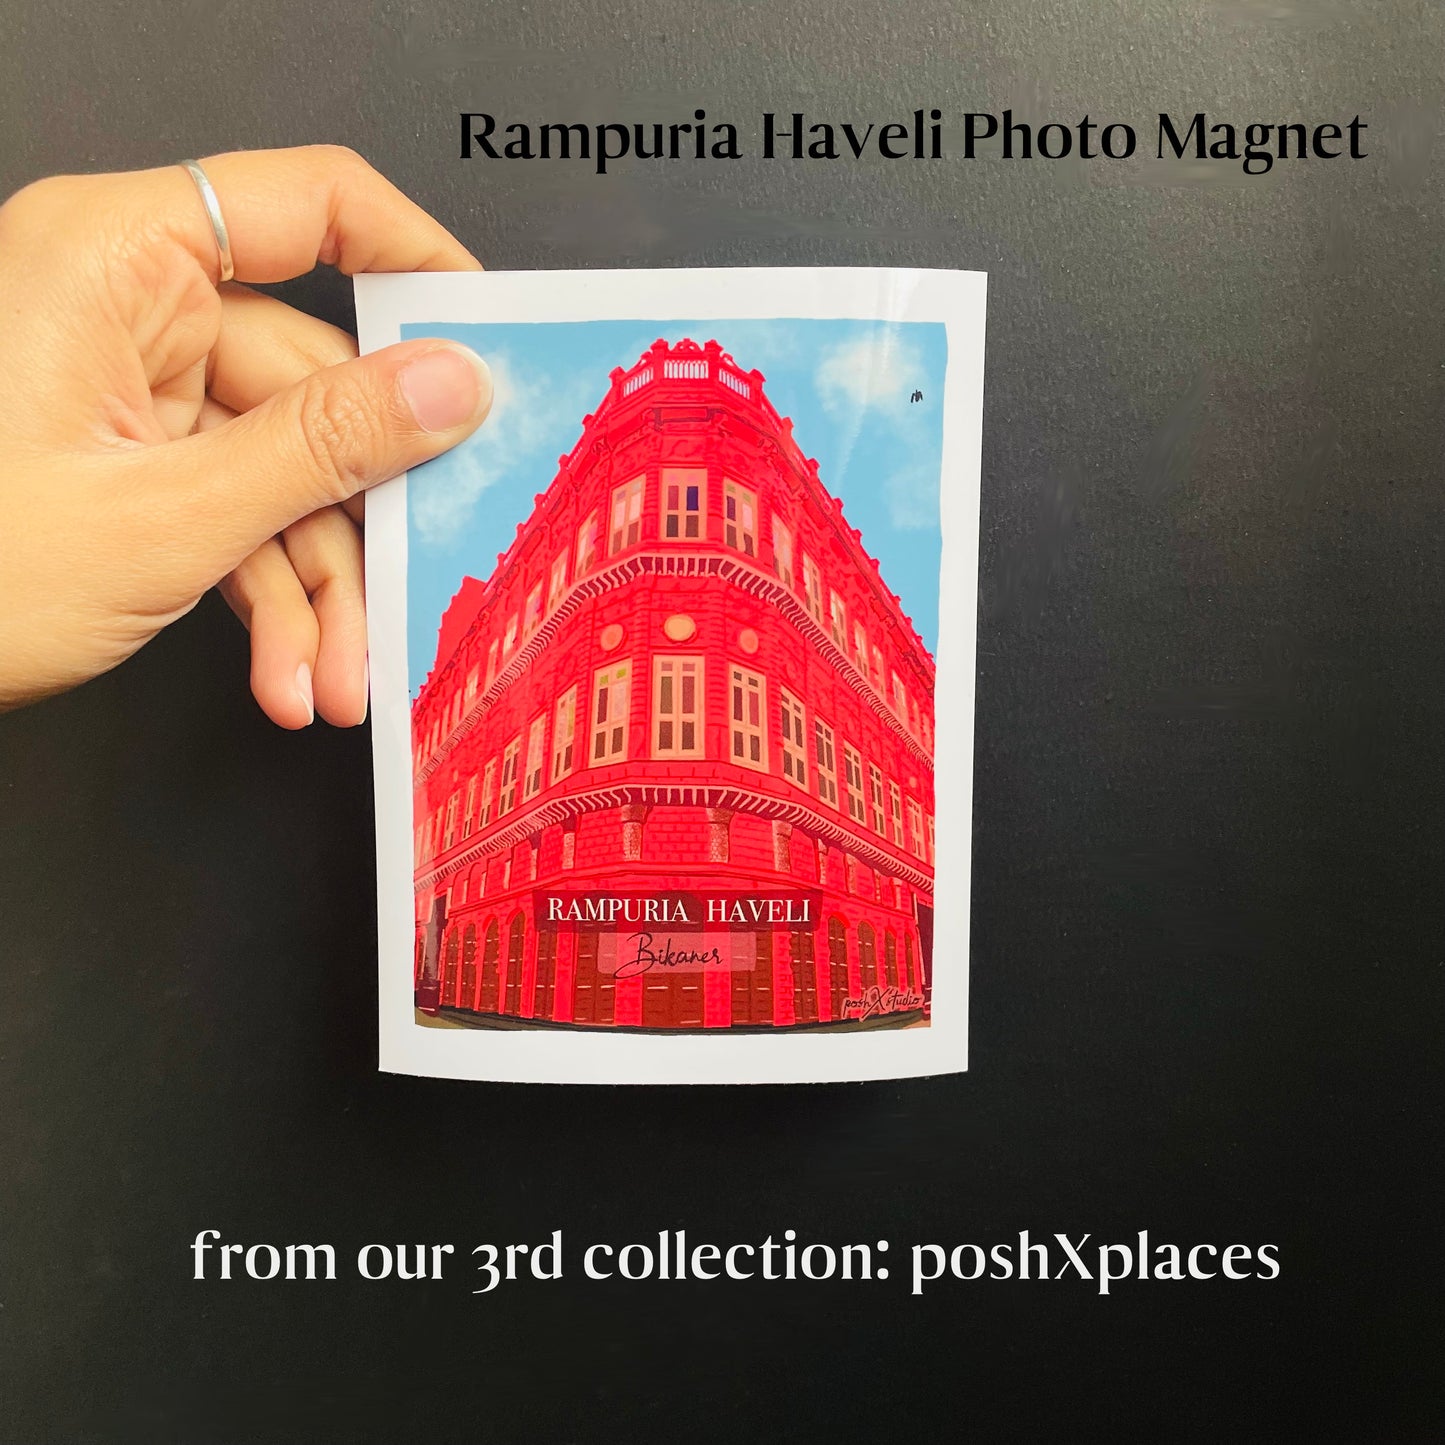 architecture student gifts bikaner rajasthan rampuria haveli silk route merchants 3rd collection poshXplaces by posh the studio jaipur buy online collectibles india fridge magnets photo magnets collection india jaipur pink city magnets